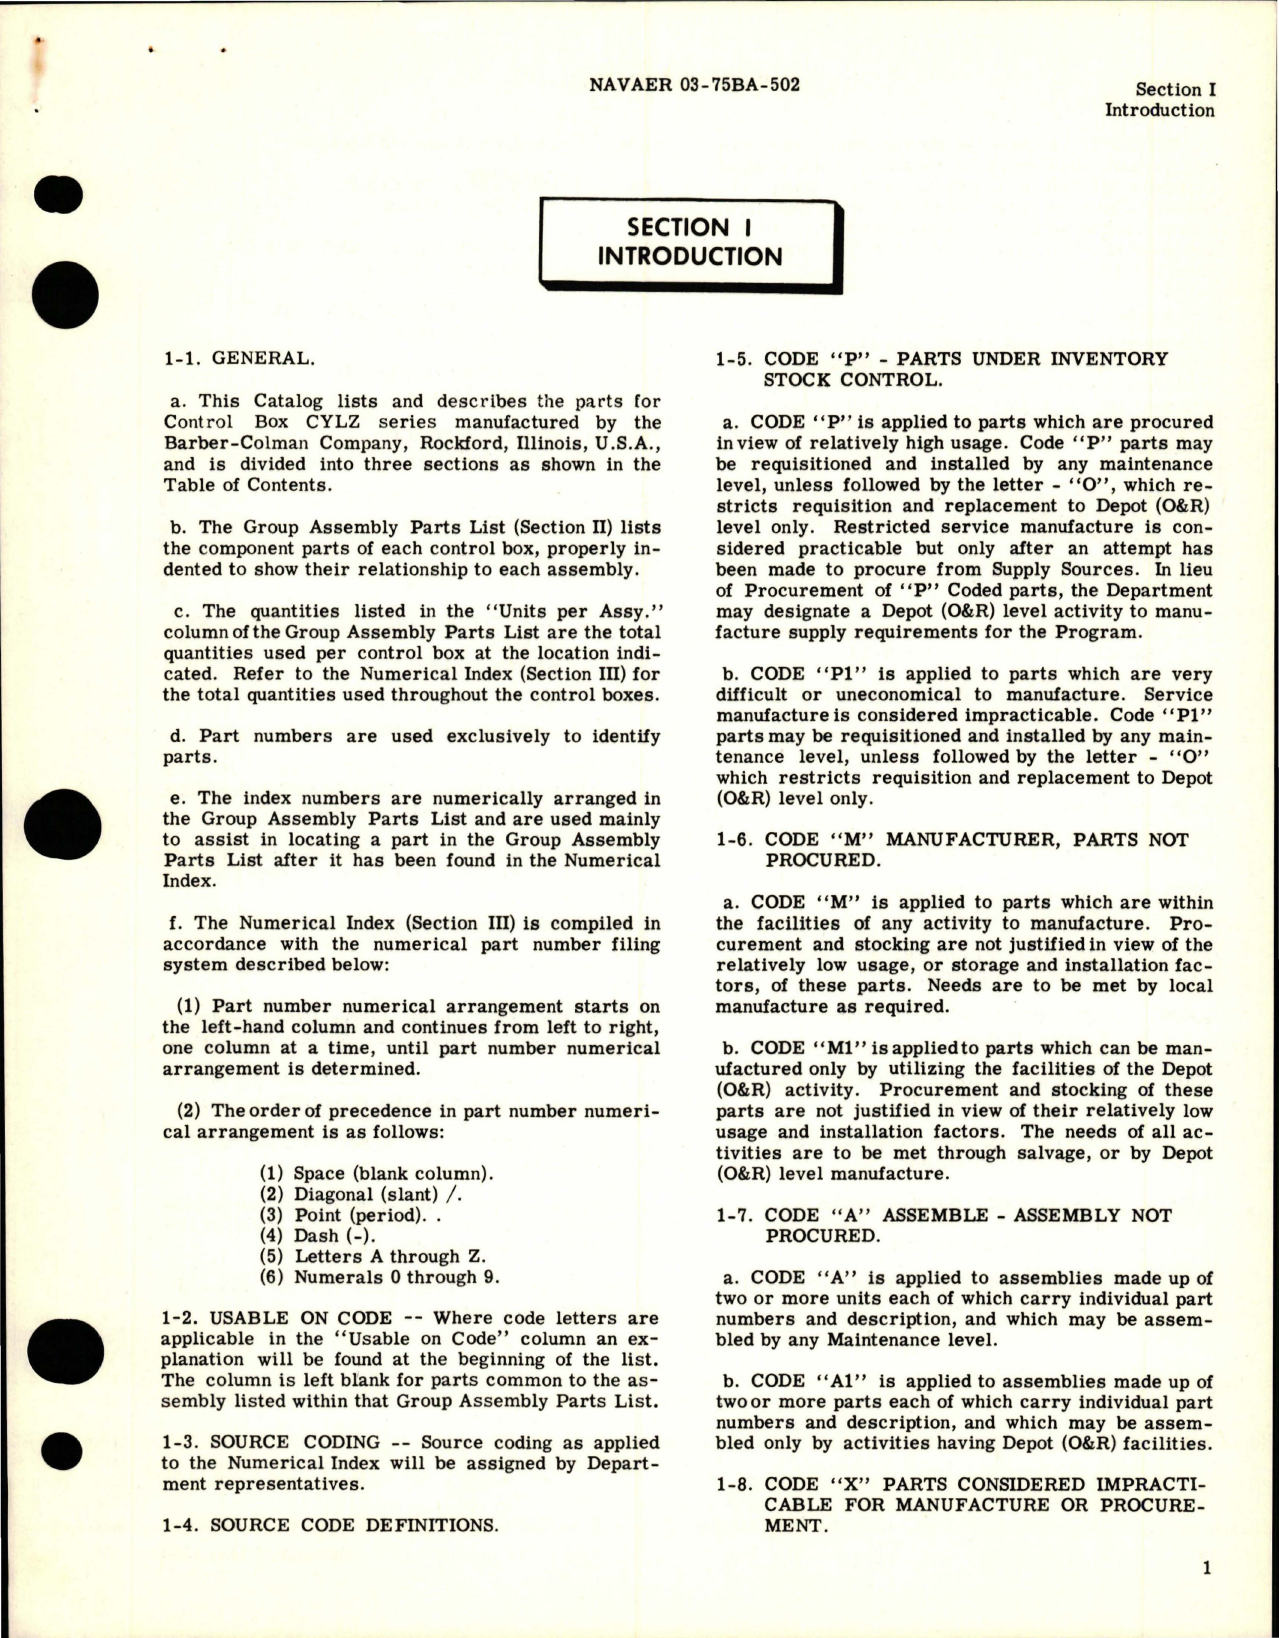 Sample page 5 from AirCorps Library document: Illustrated Parts Breakdown for Aircraft Temperature Control System Control Box